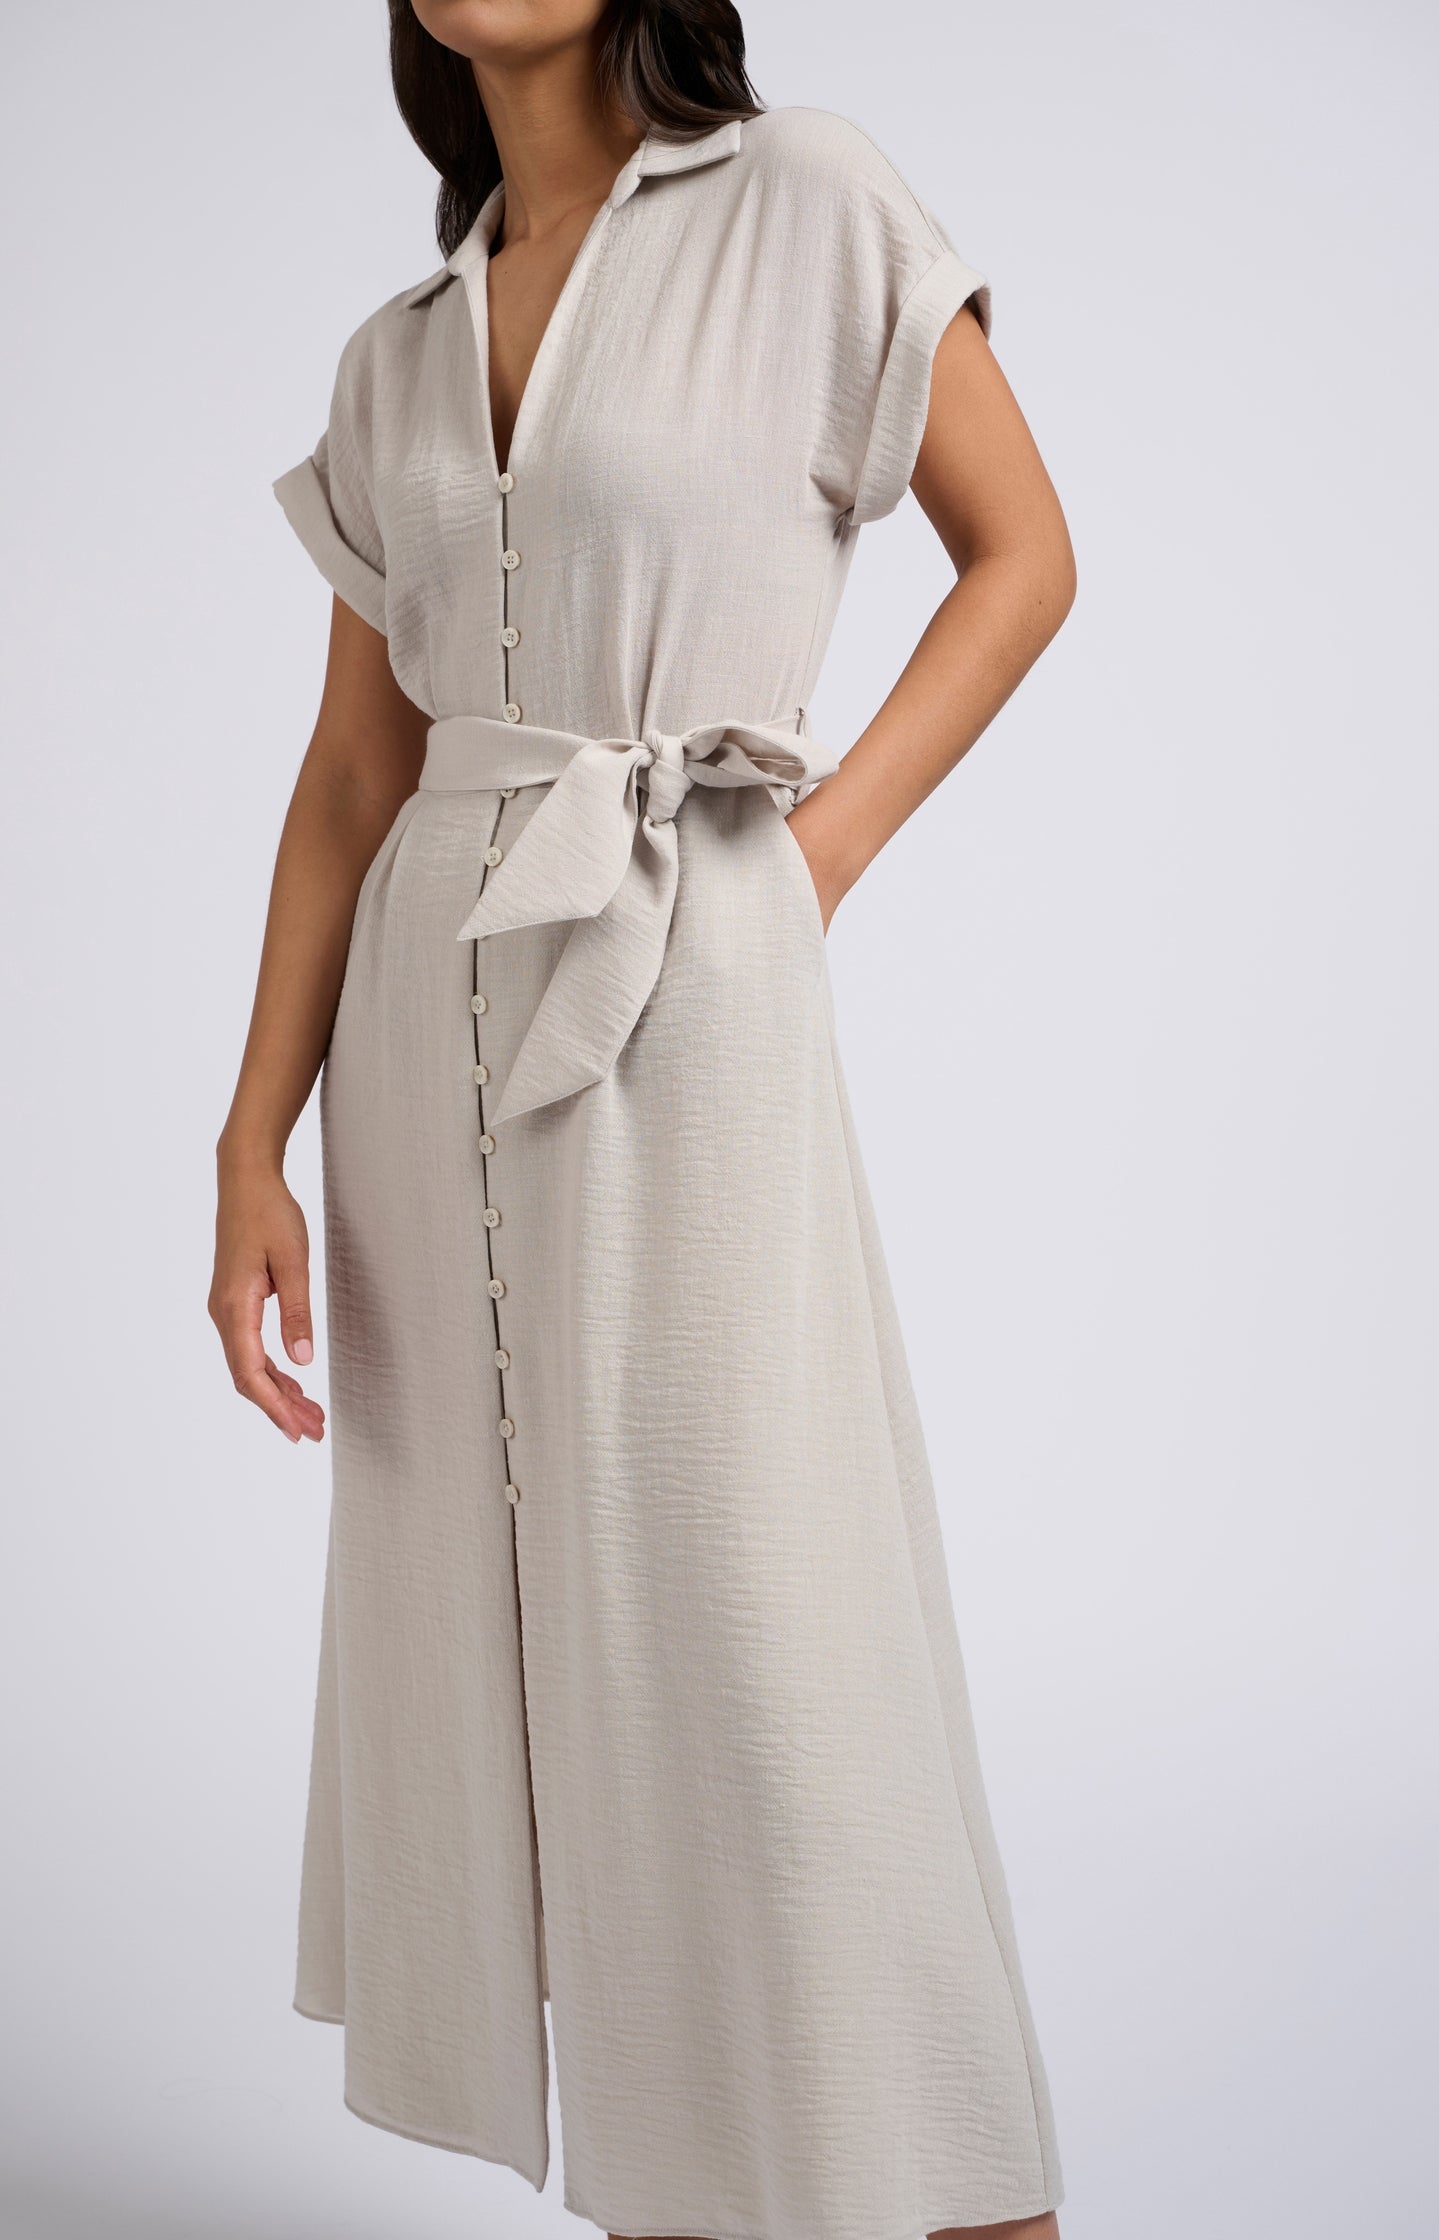 Woven midi dress with short sleeves and tie belt